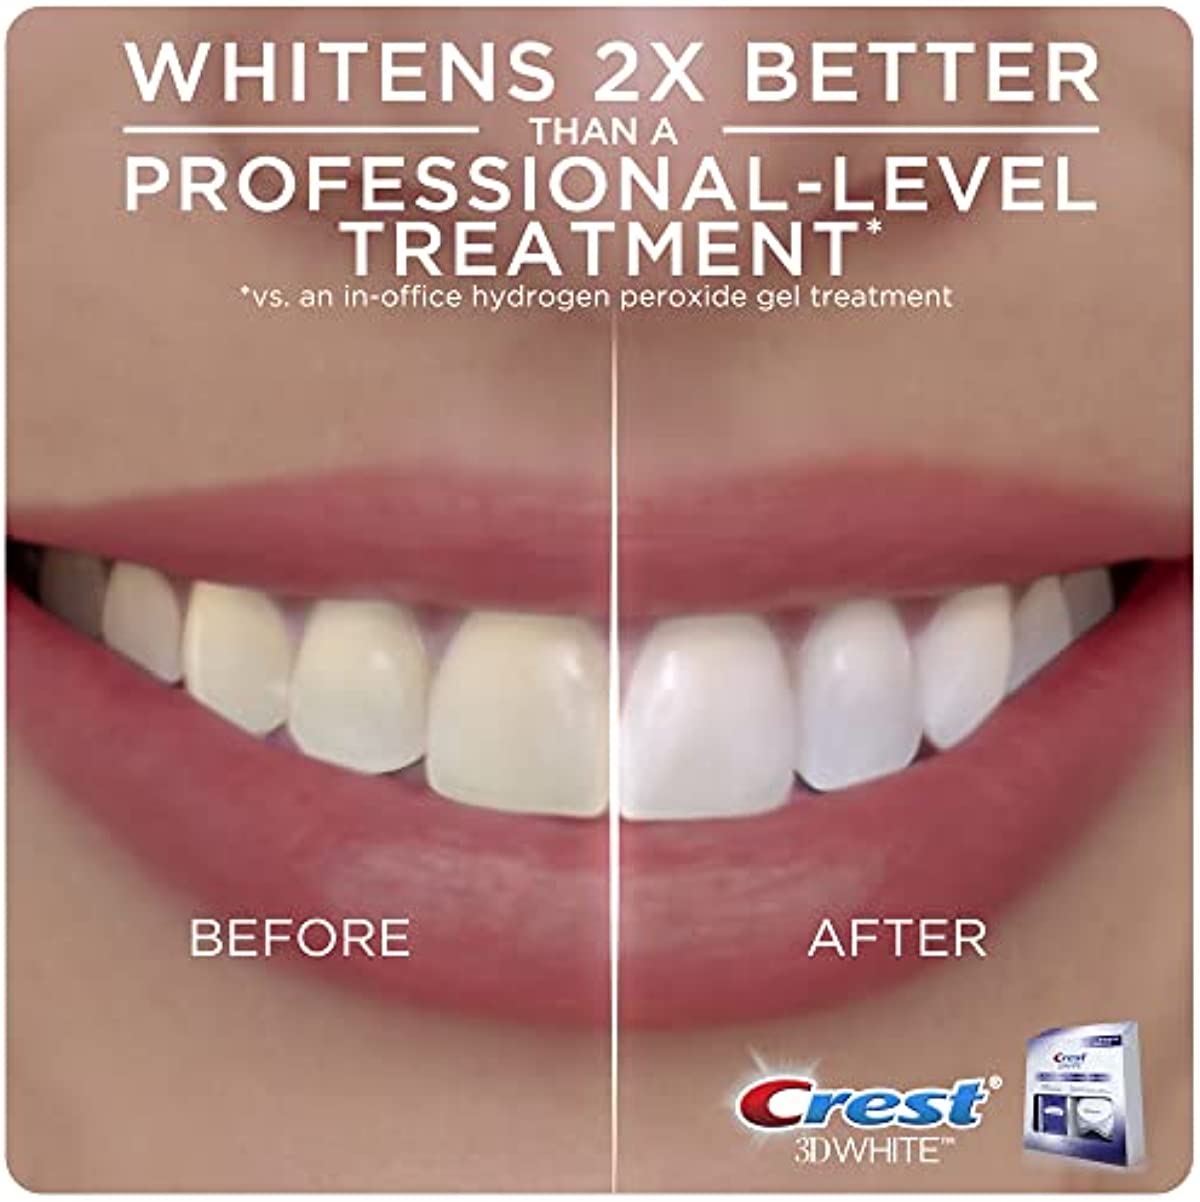 Crest 3D Whitestrips with Light, Teeth Whitening Strip Kit, 20 Strips (10 Count Pack)